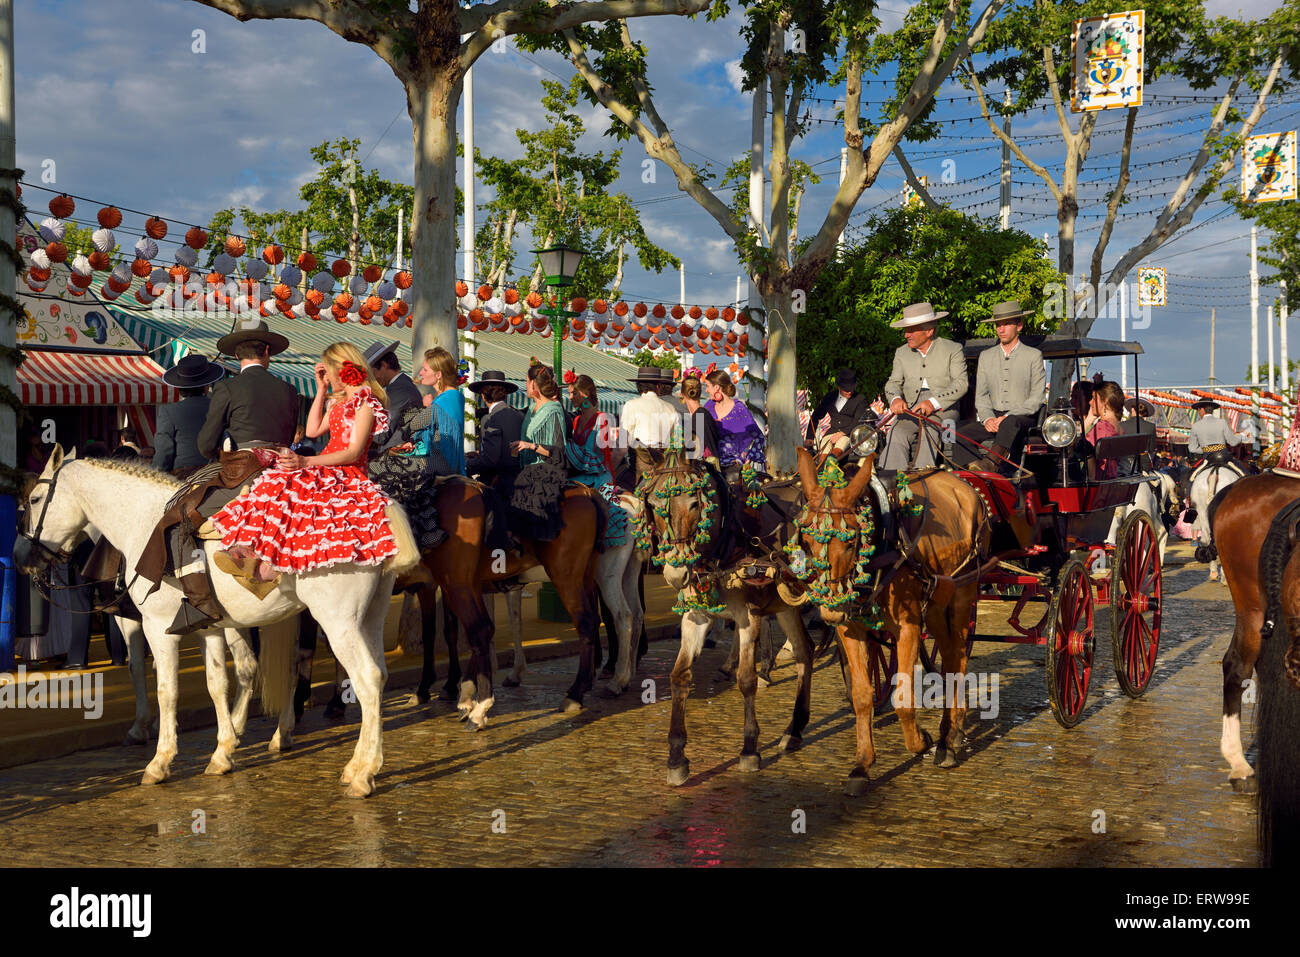 Couples on horseback and mules with carriage on cobblestone street at sunset Seville April Fair Spain Stock Photo